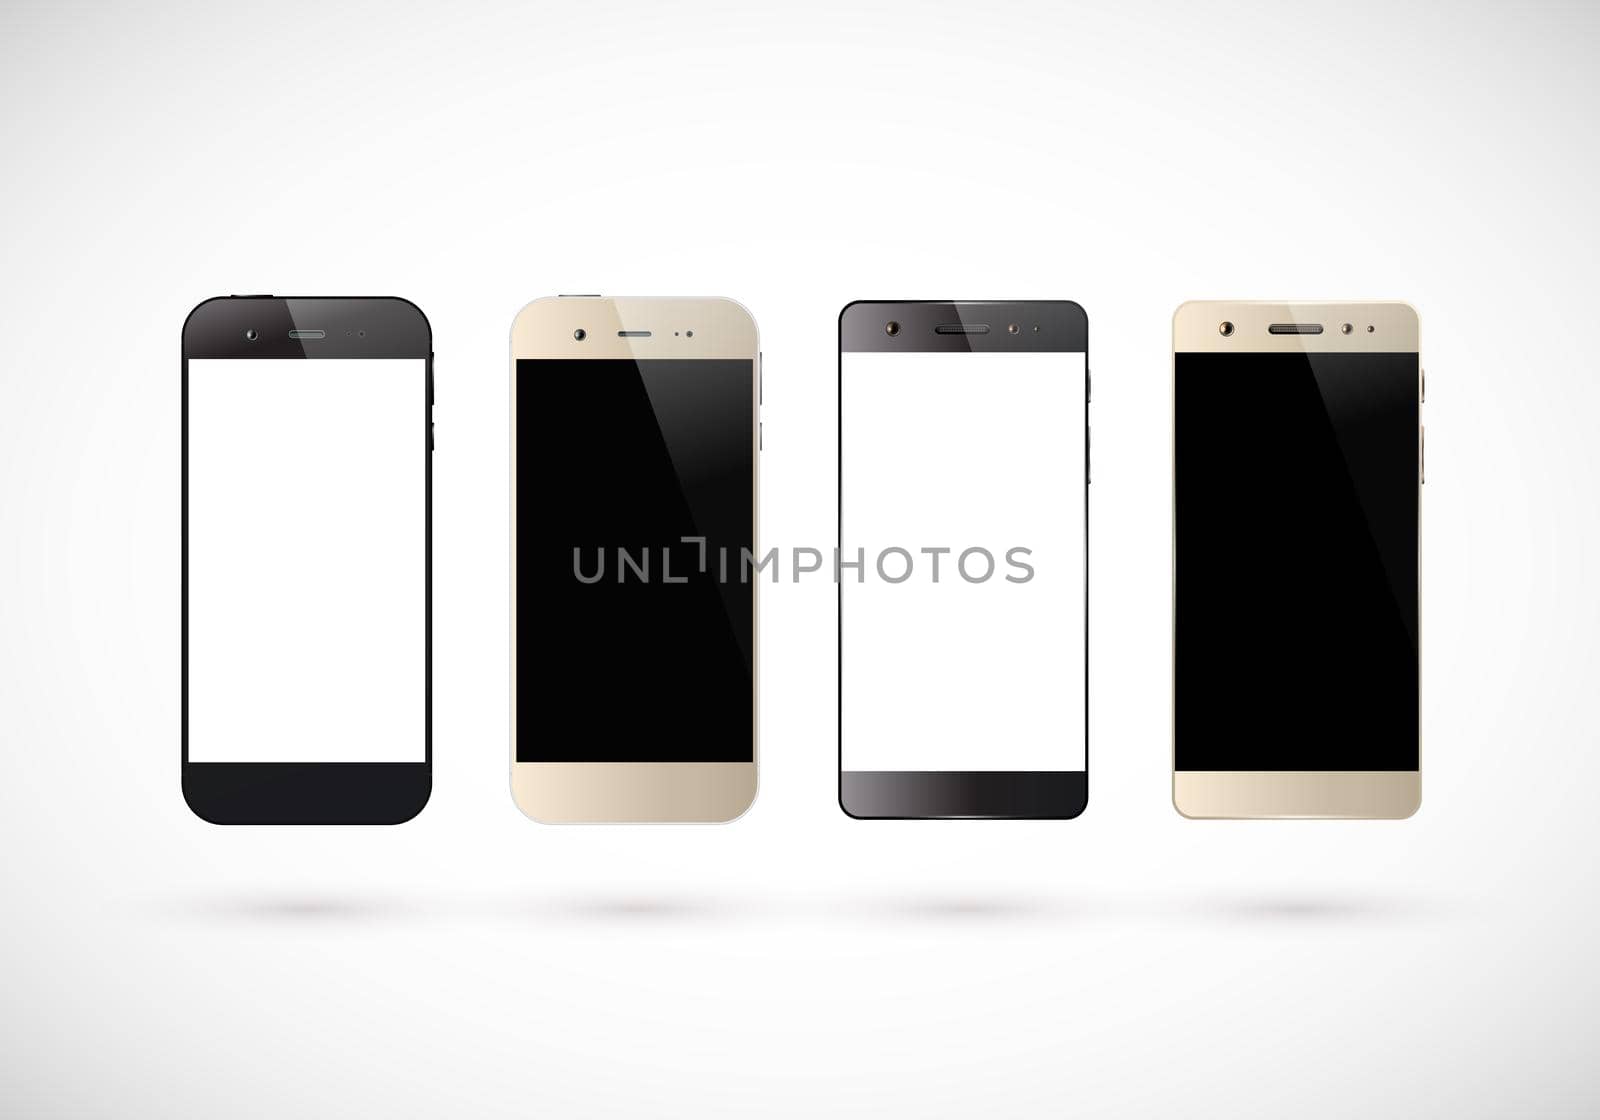 Four black and white smartphones by Bobnevv